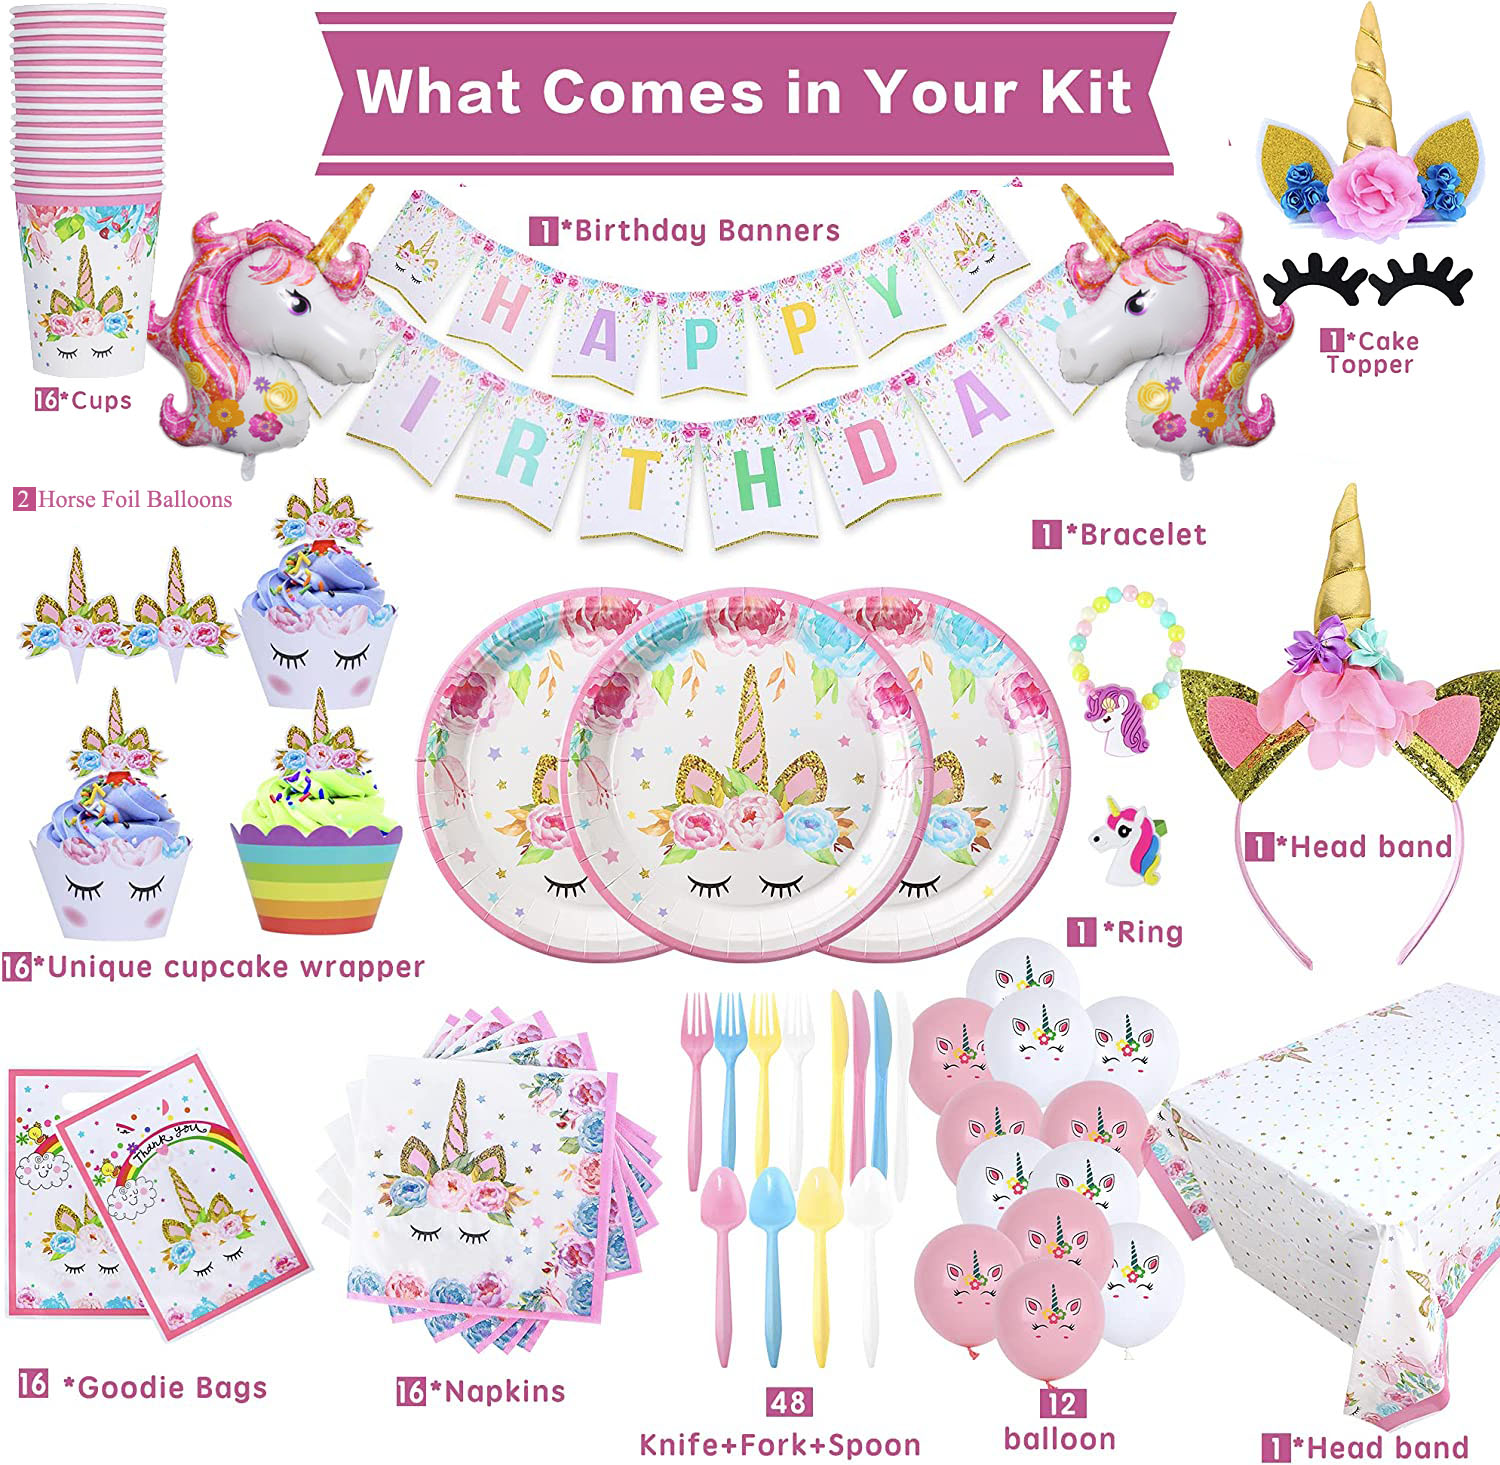 Unicorn Party Supplies and Plates for Girls Birthday - Unicorn Birthday Party Decorations Set with Goodie bags,Unicorn Ring,Unicorn Bracelet, XL Table Cloth for Creating Amazing Unicorn Theme Party - image 2 of 7